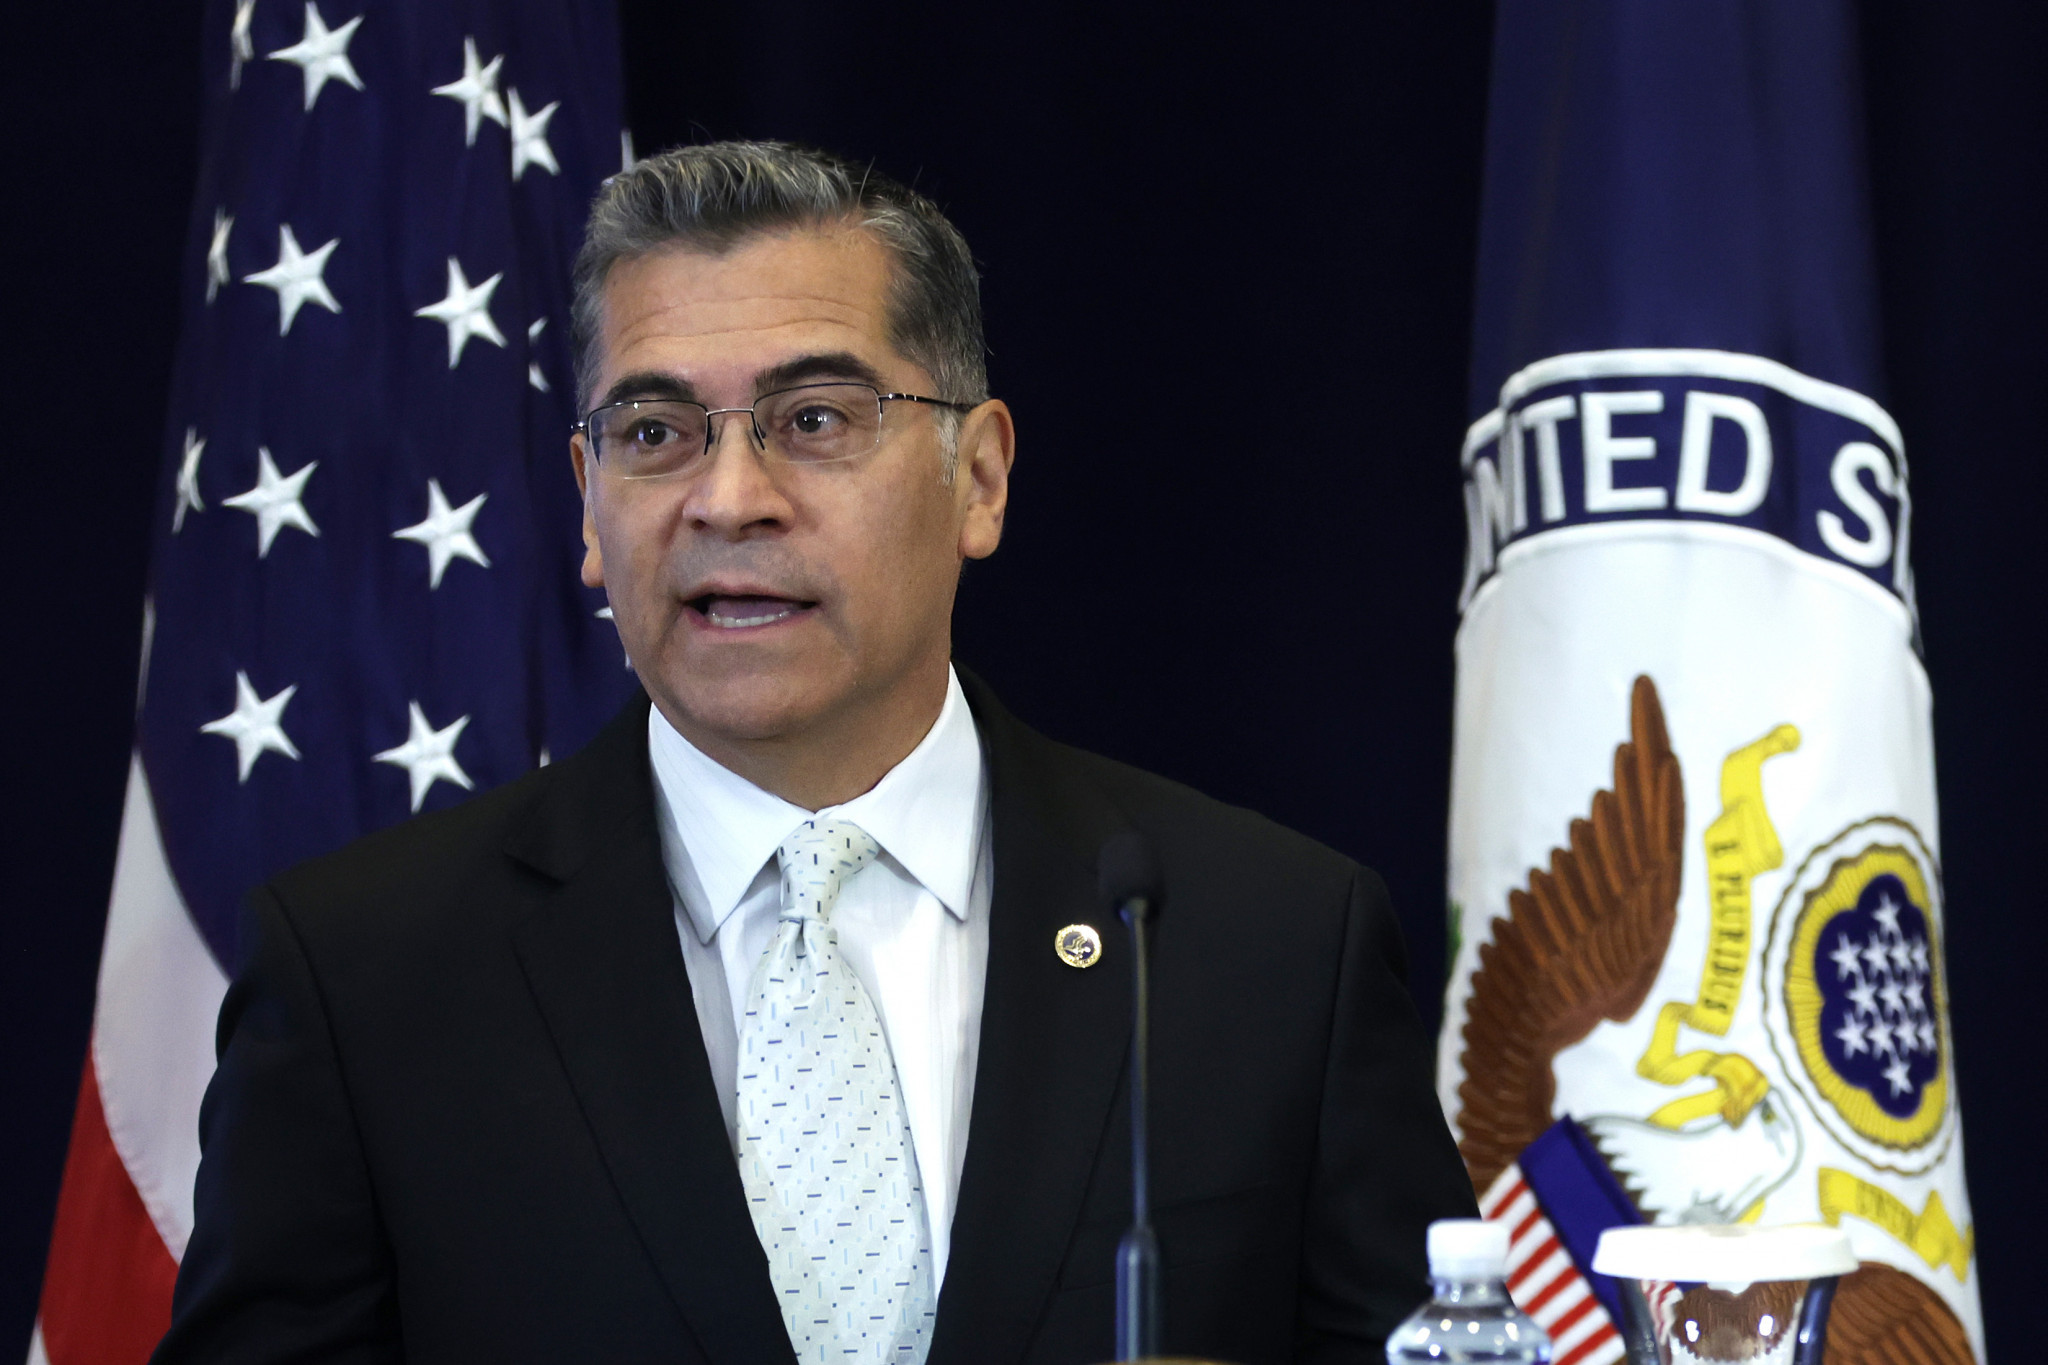 Secretary of Health and Human Services Xavier Becerra is set to lead the US delegation at the Pan American Games Opening Ceremony ©Getty Images